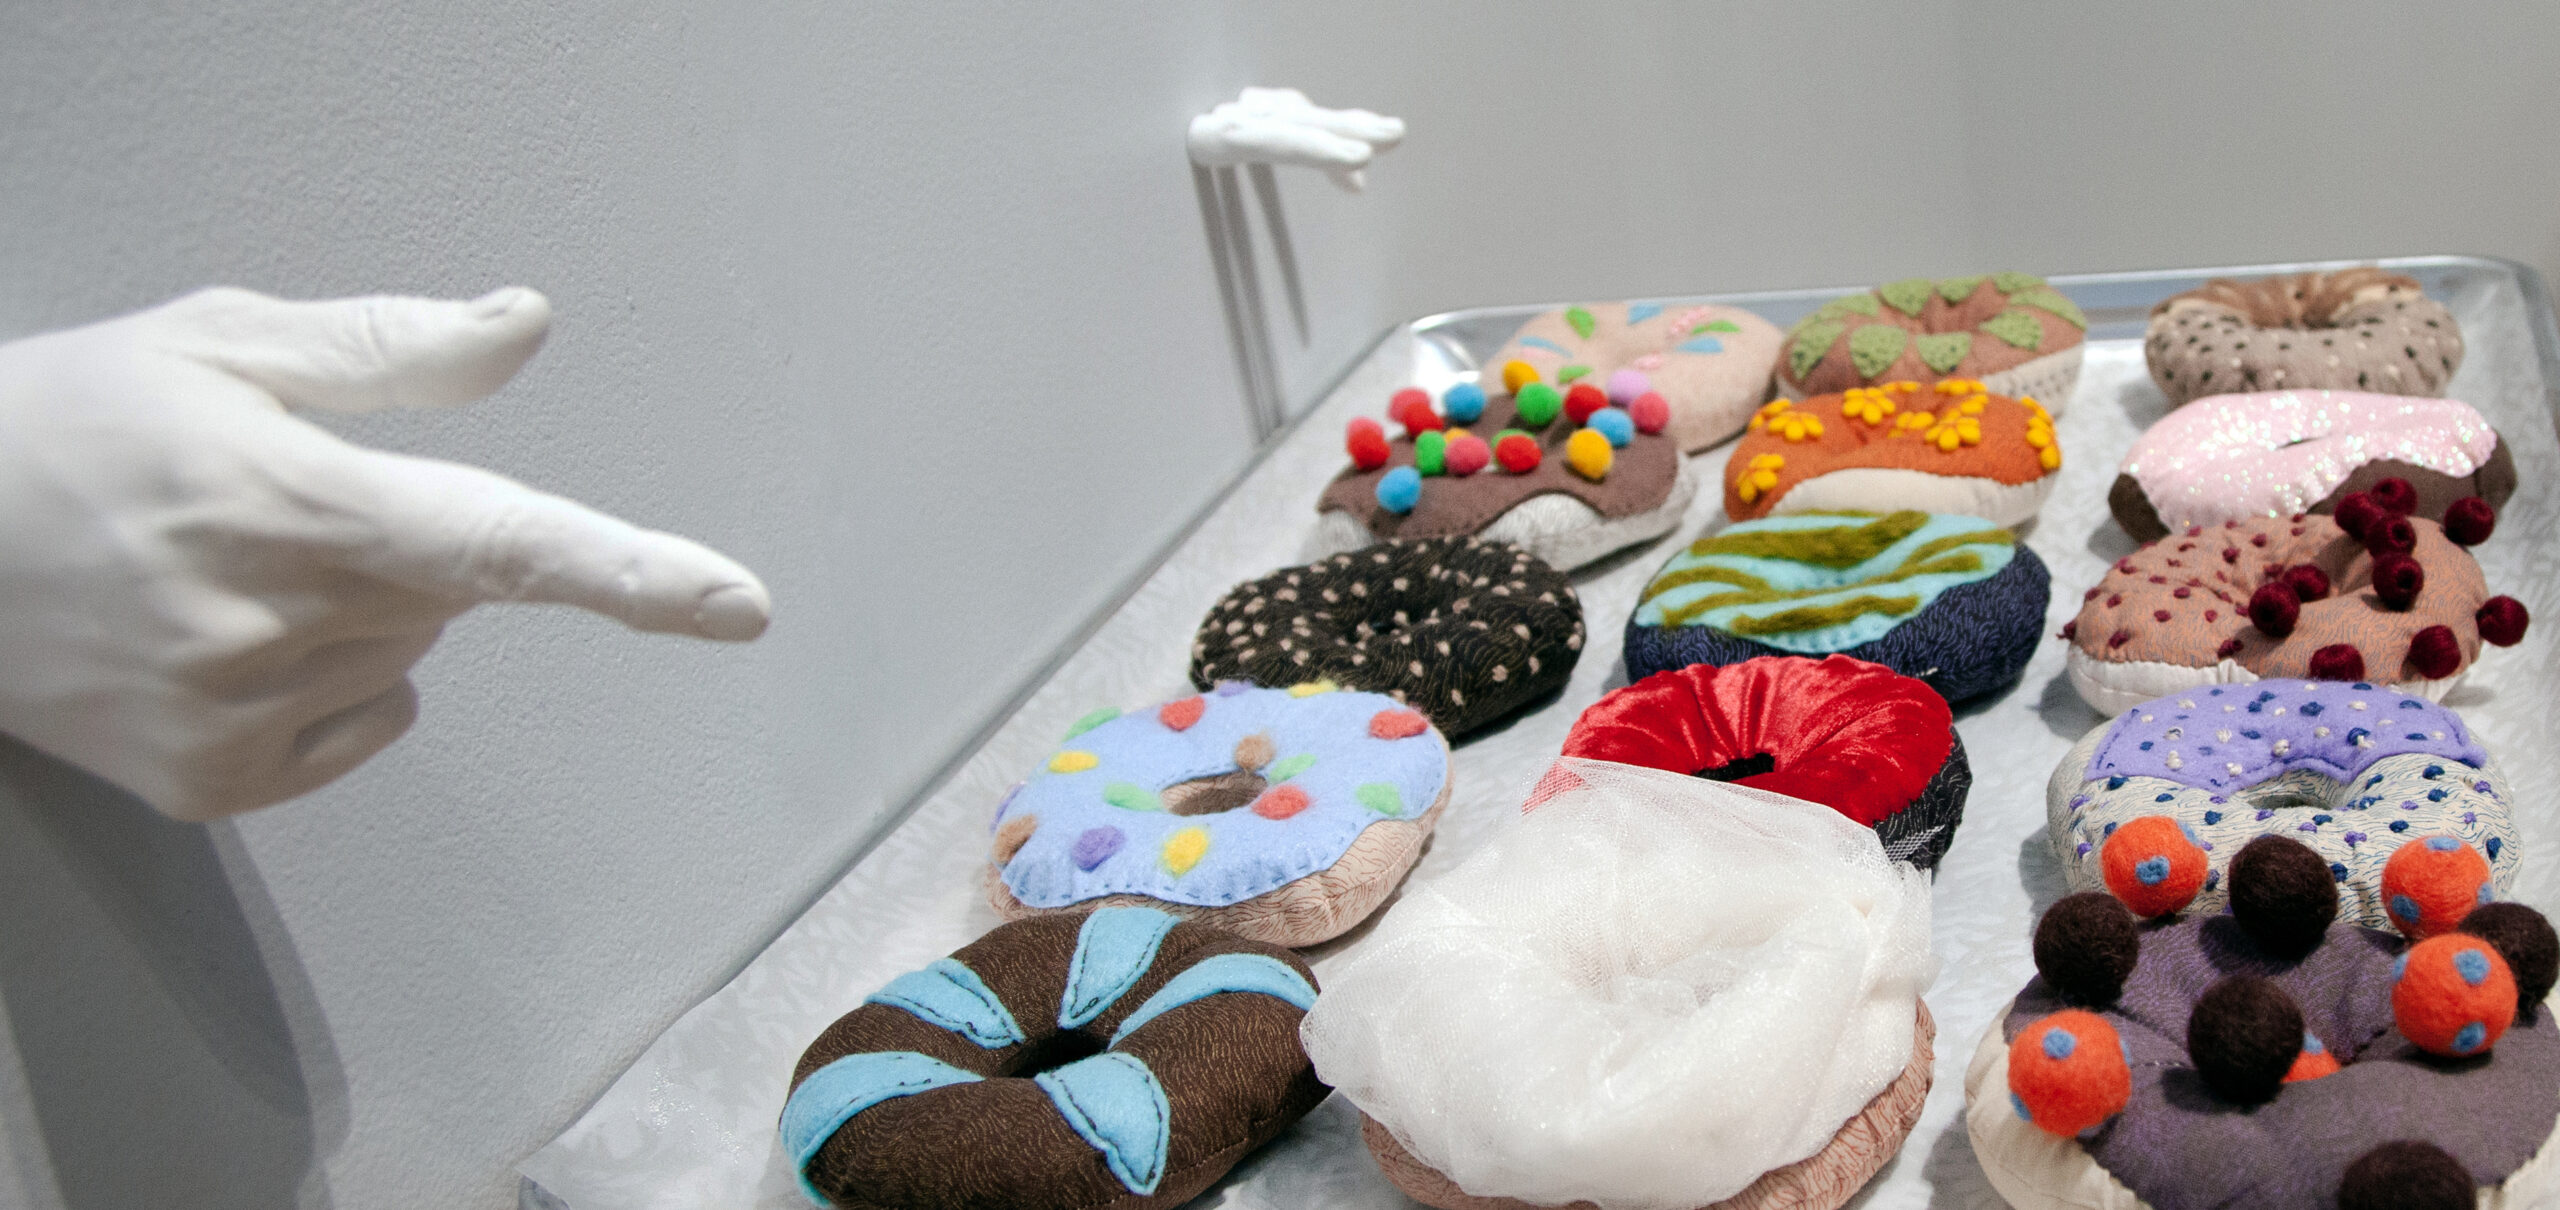 A tray of soft-sculpture doughnuts made from various fabrics, pompoms and accessories. Some fabrics are screen printed with patterned designs. The tray is attached to a gallery wall beneath white plaster casts of fingers and hands in obscene gestures.